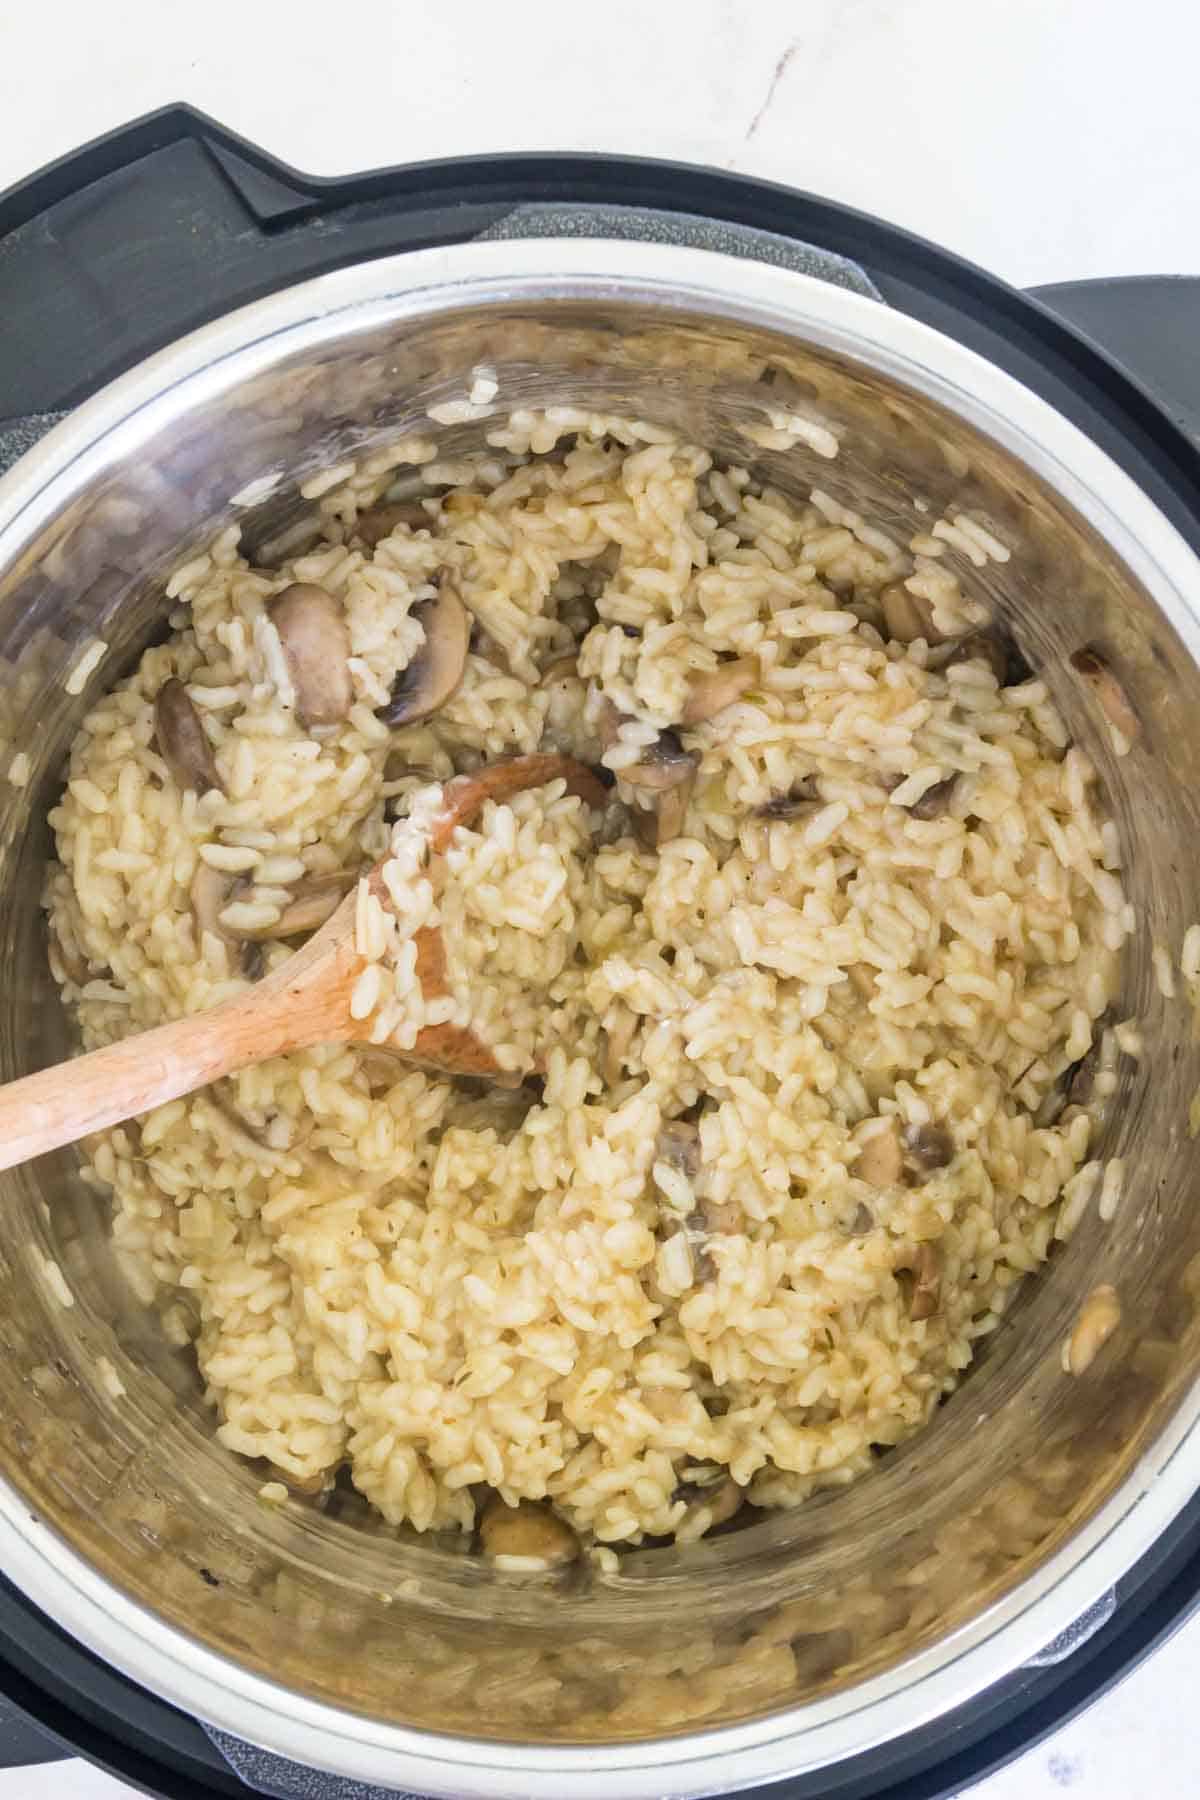 Finished mushroom risotto inside the Instant Pot.